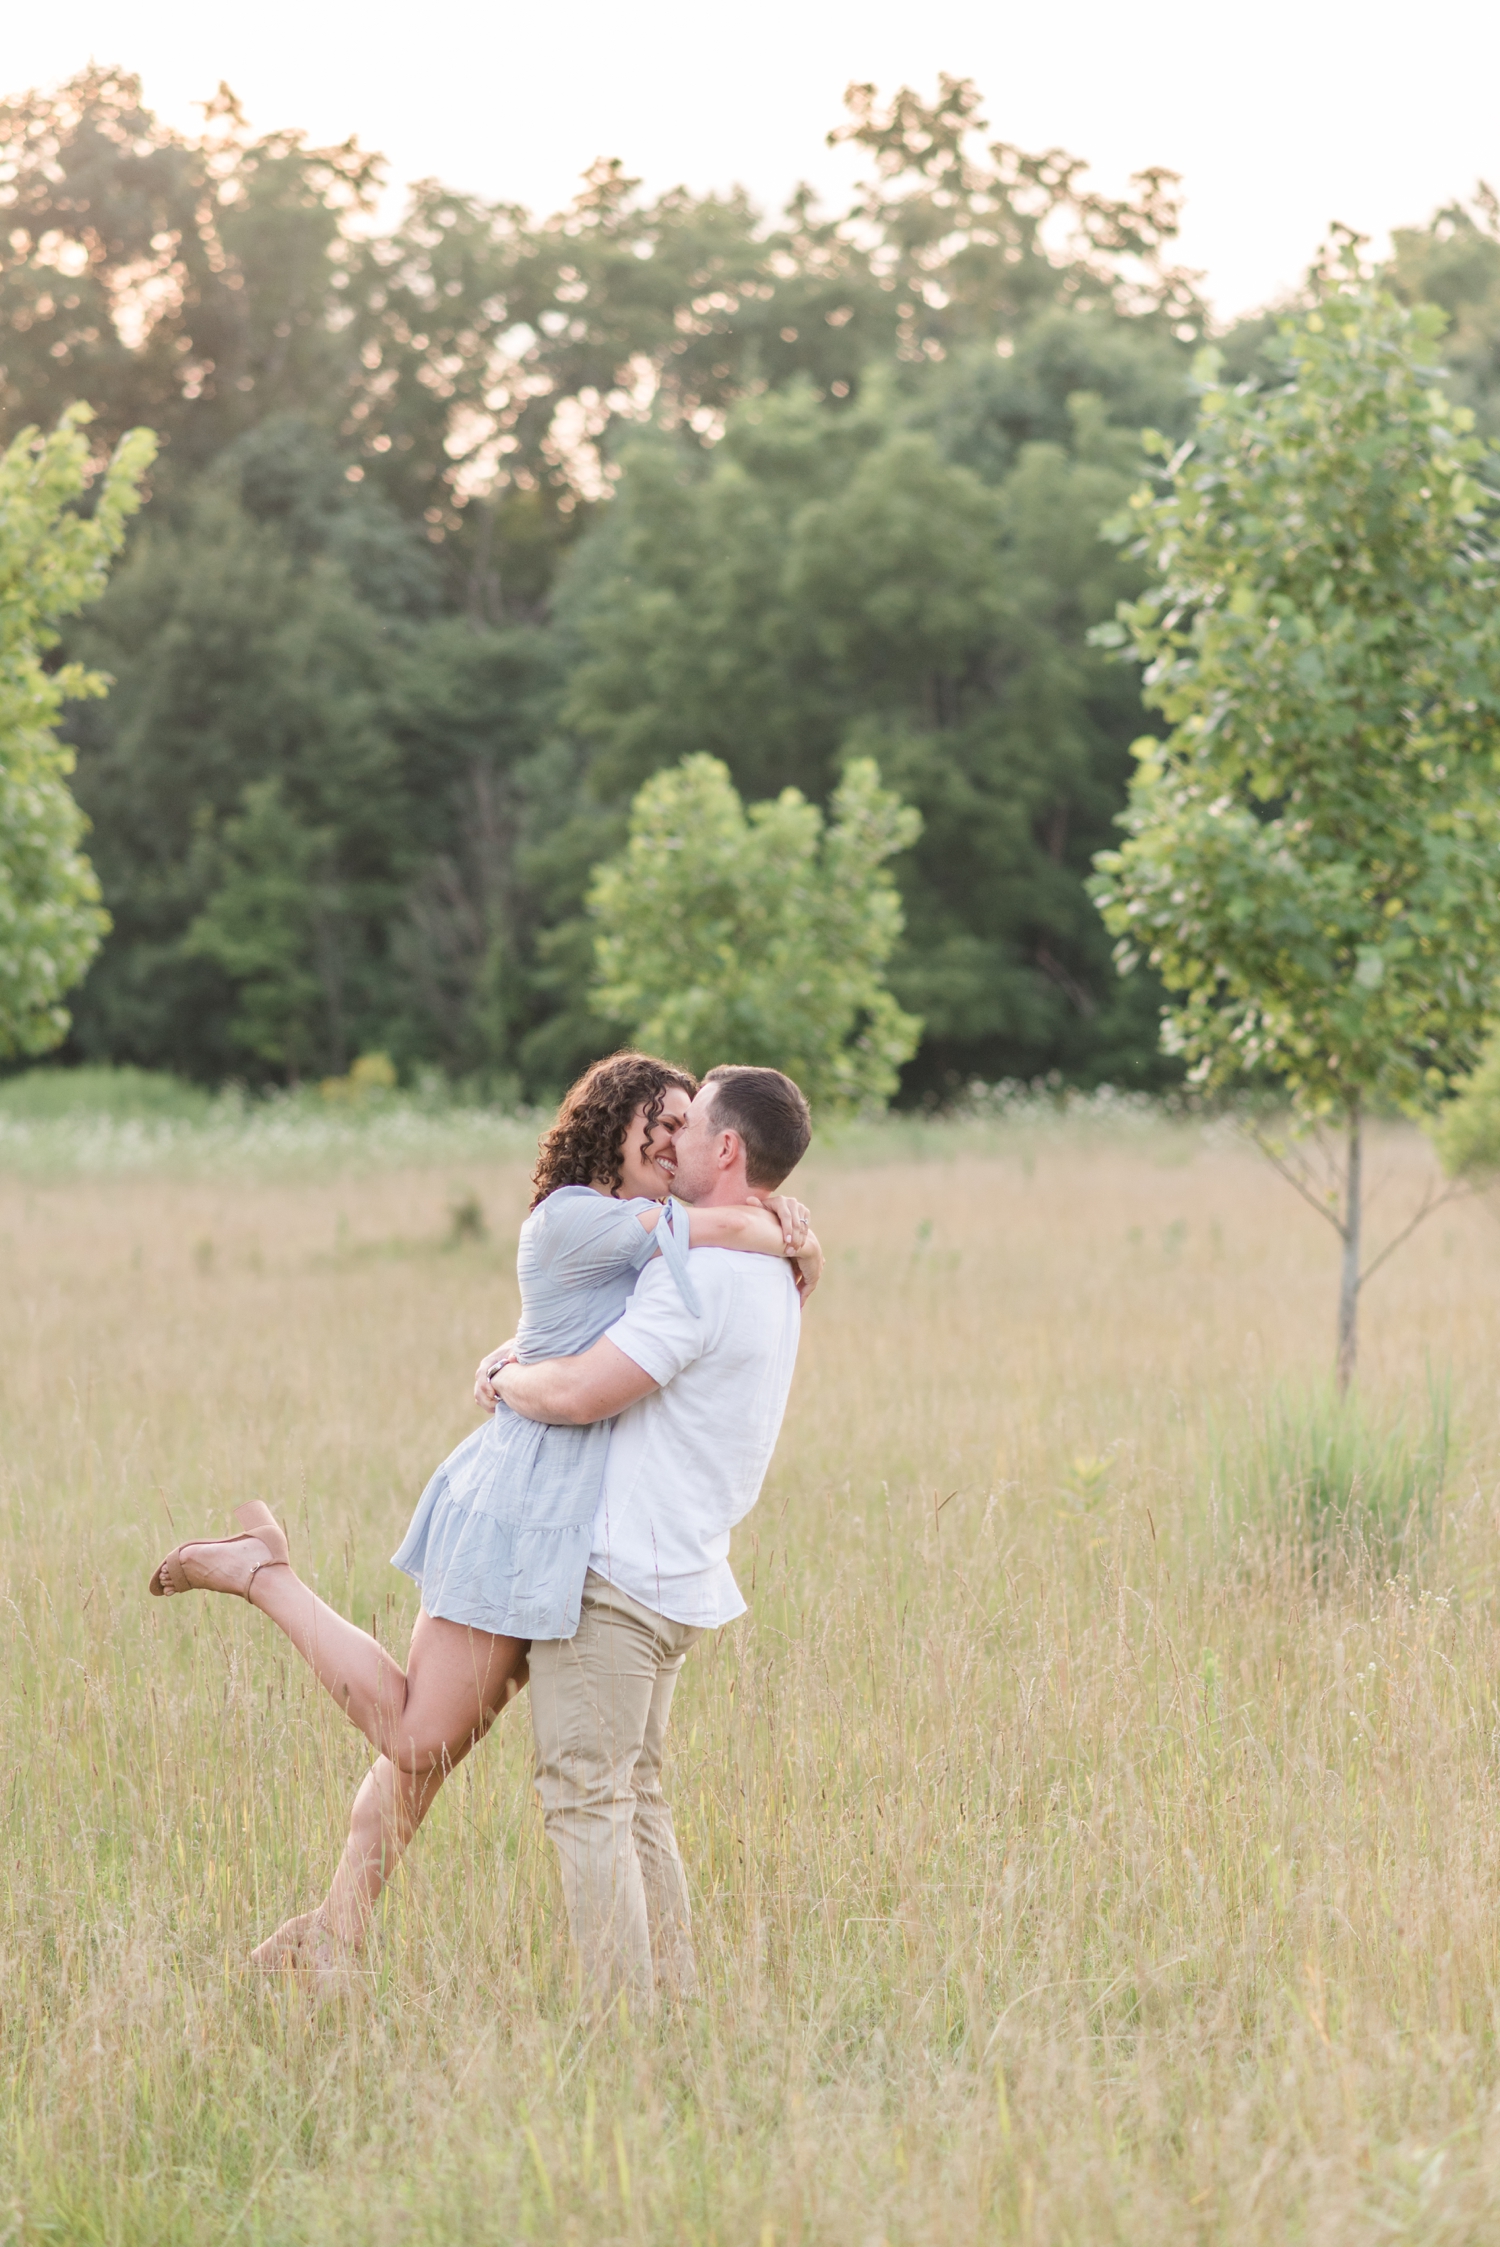 photo of engaged couple at Sunset Engagement Session at Metea Park by Courtney Rudicel, a wedding photographer in Indiana